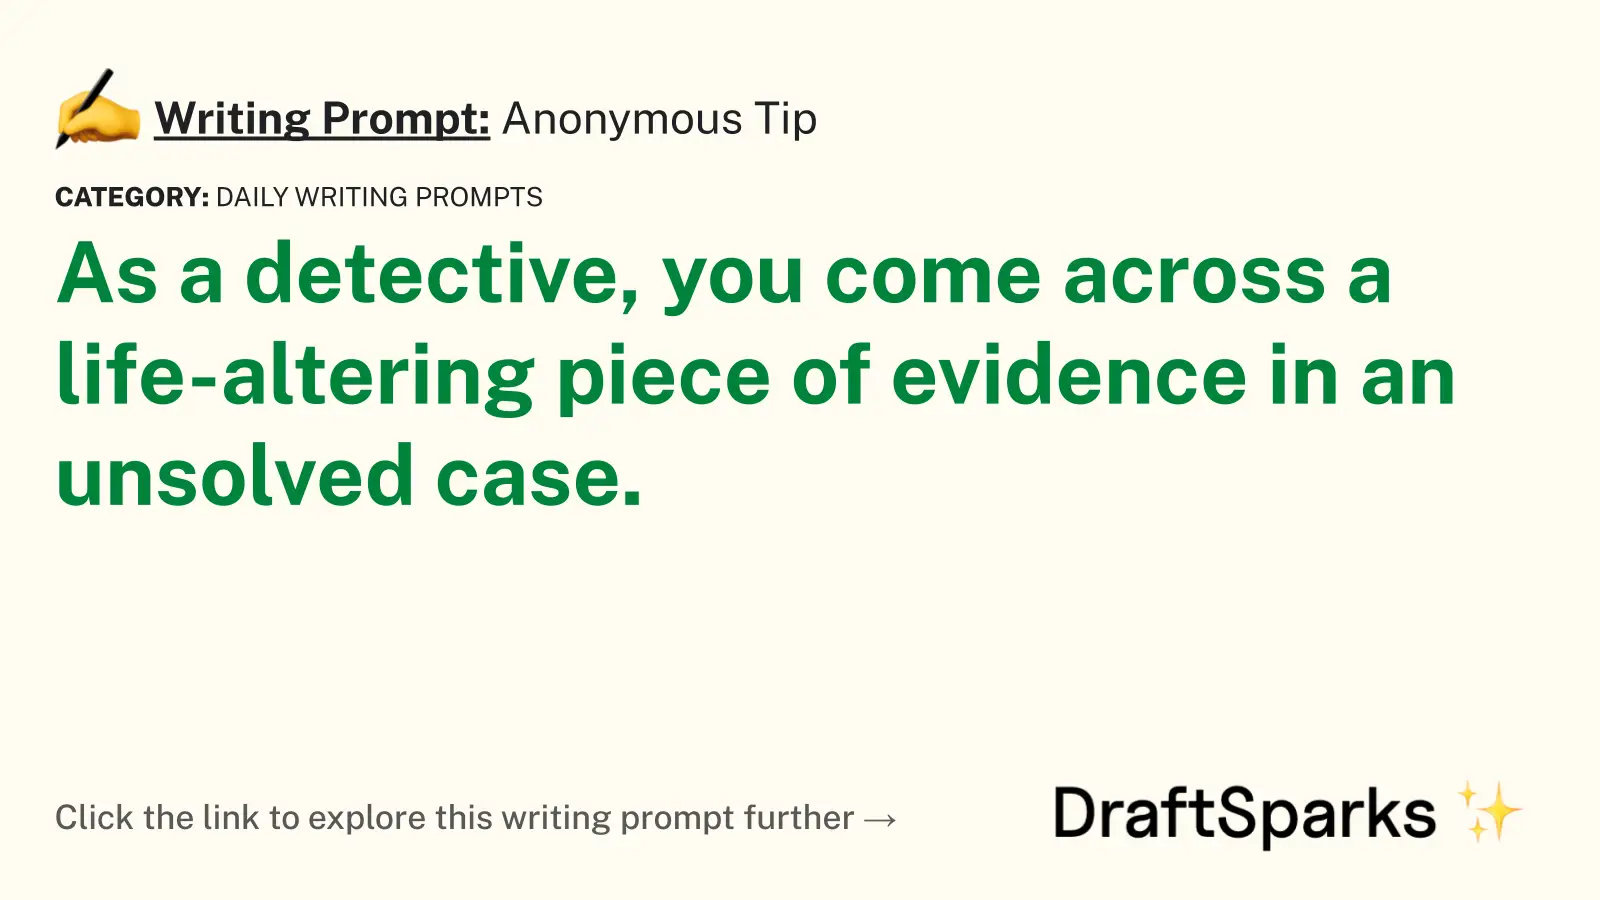 Anonymous Tip